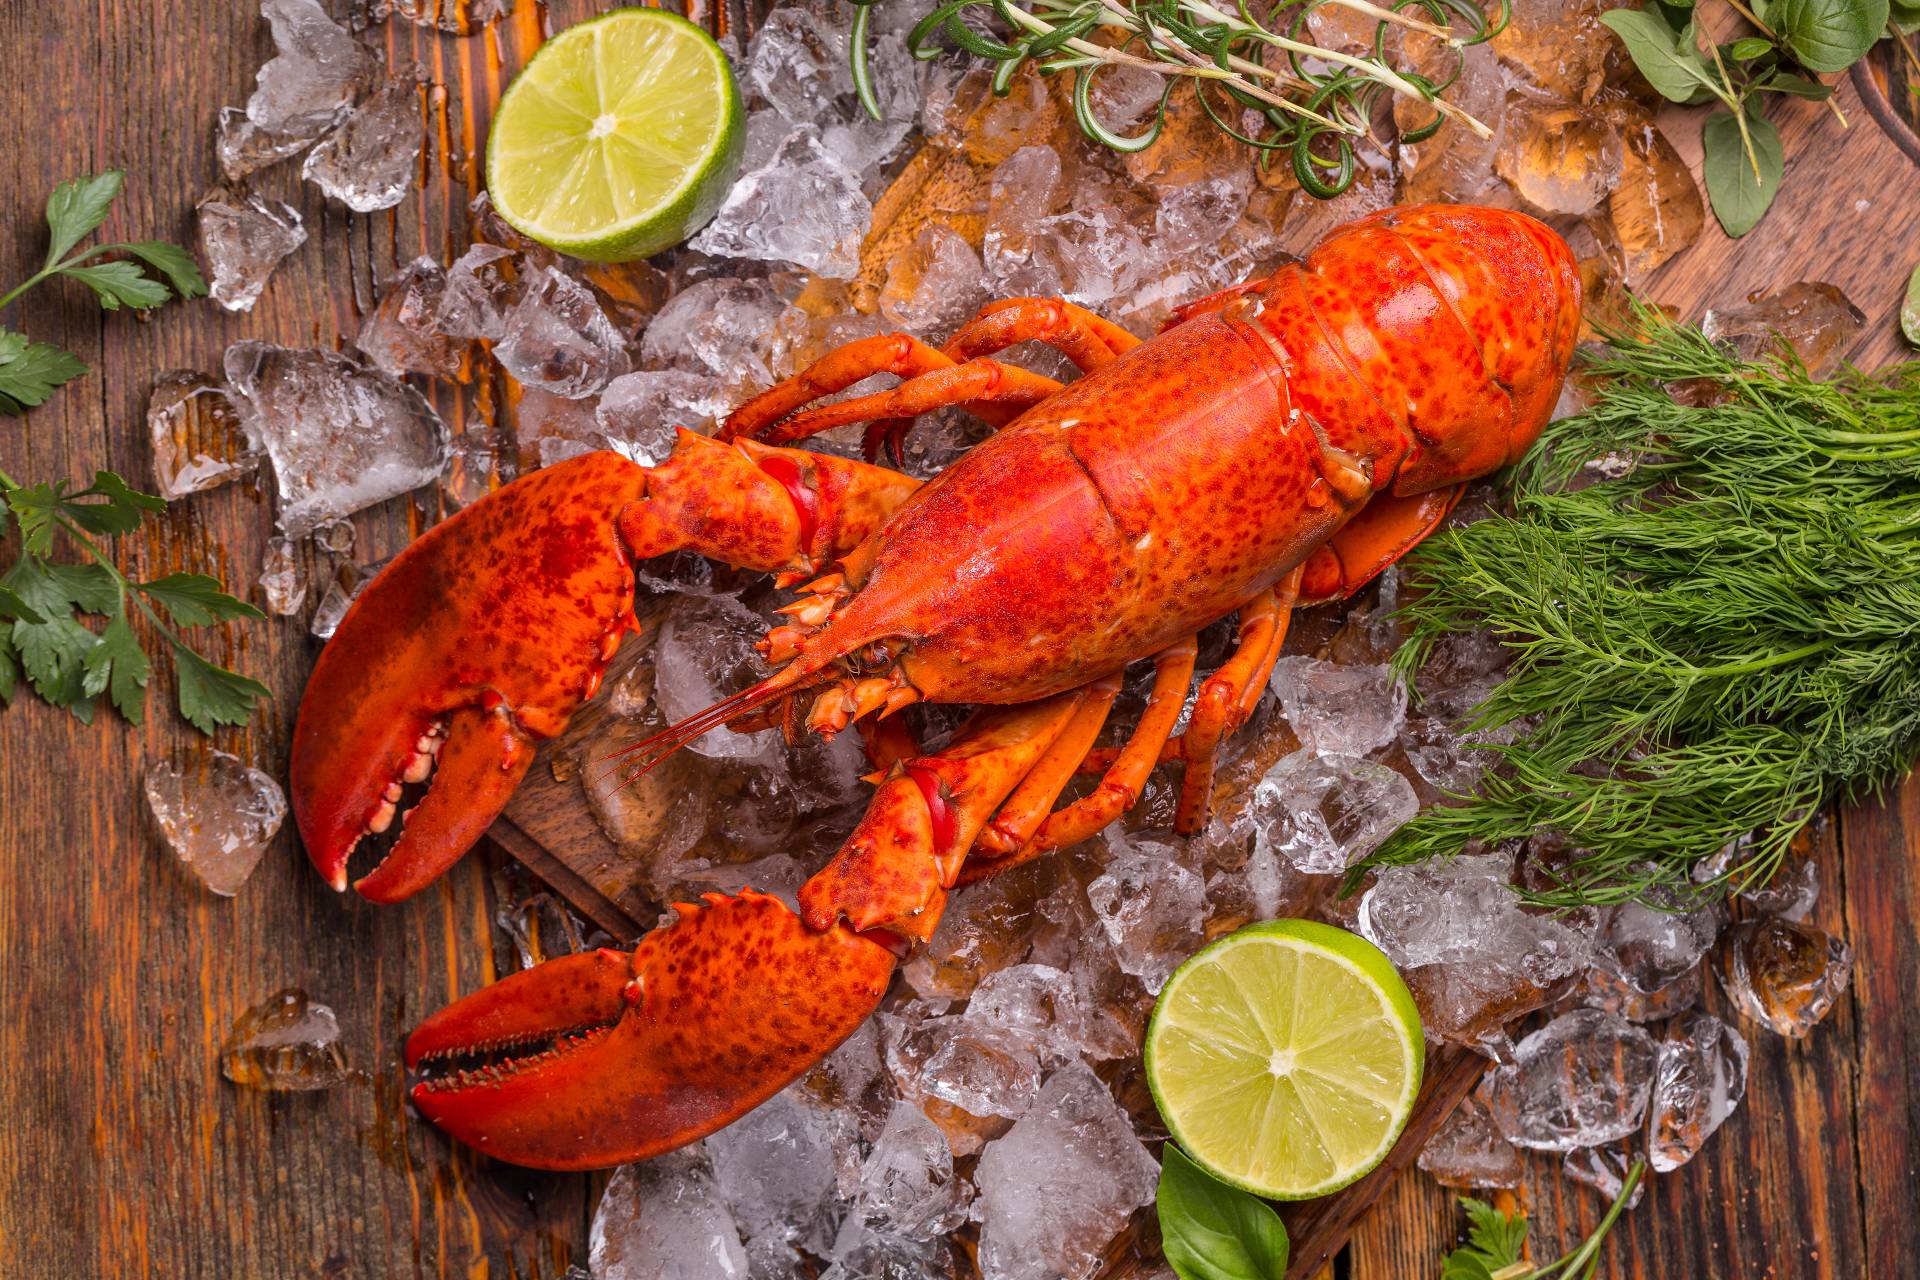 Fish and seafood from A to Z: The lobster